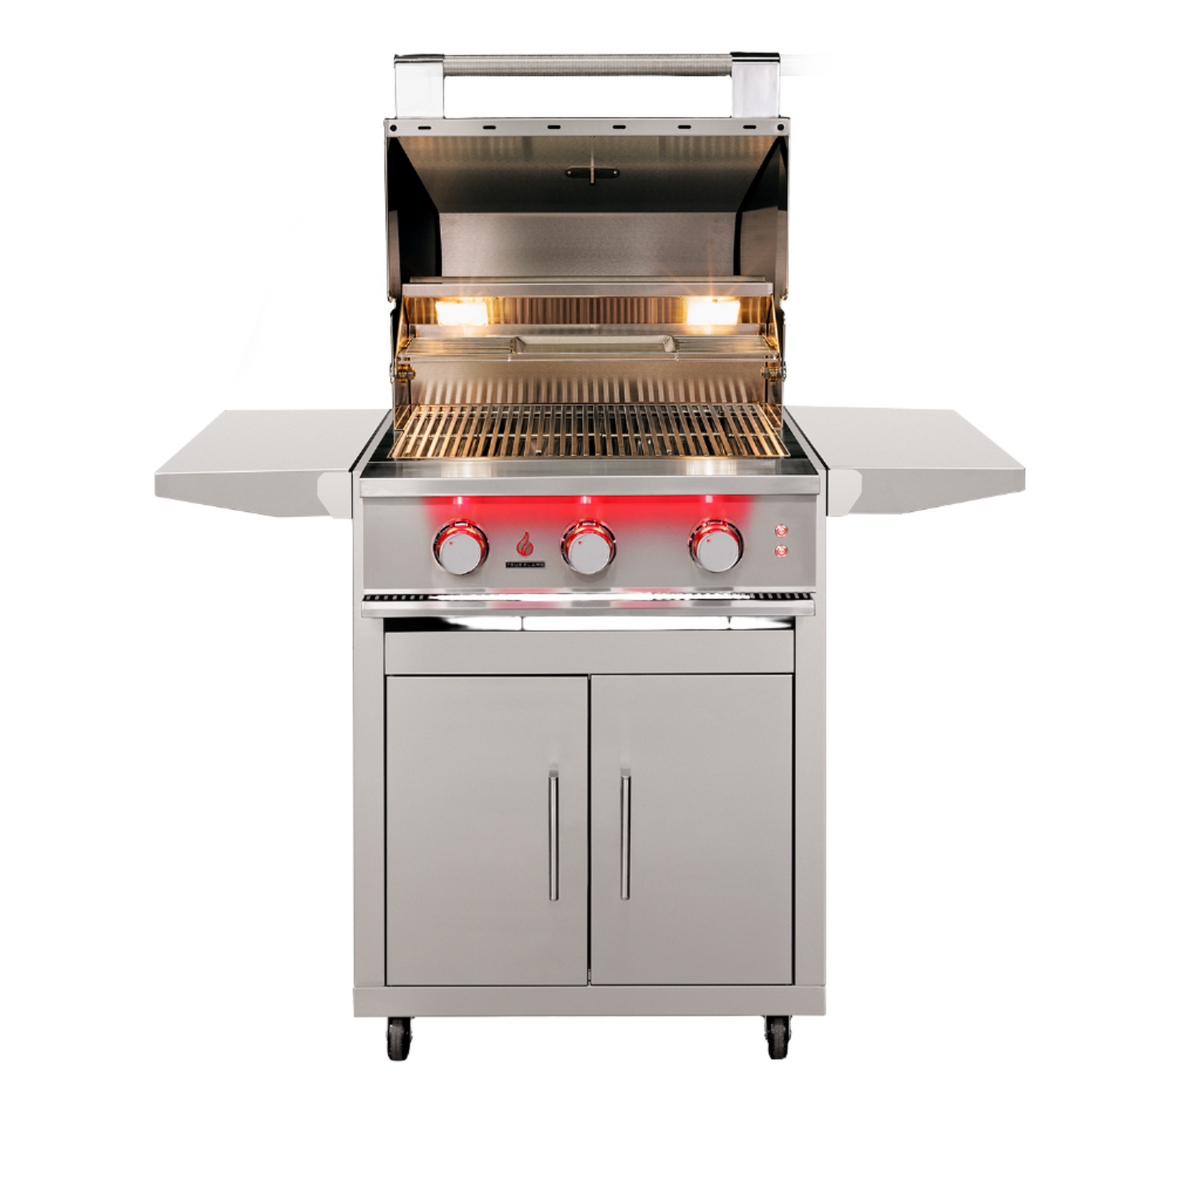 TrueFlame 25 Inch Grill - Freestanding